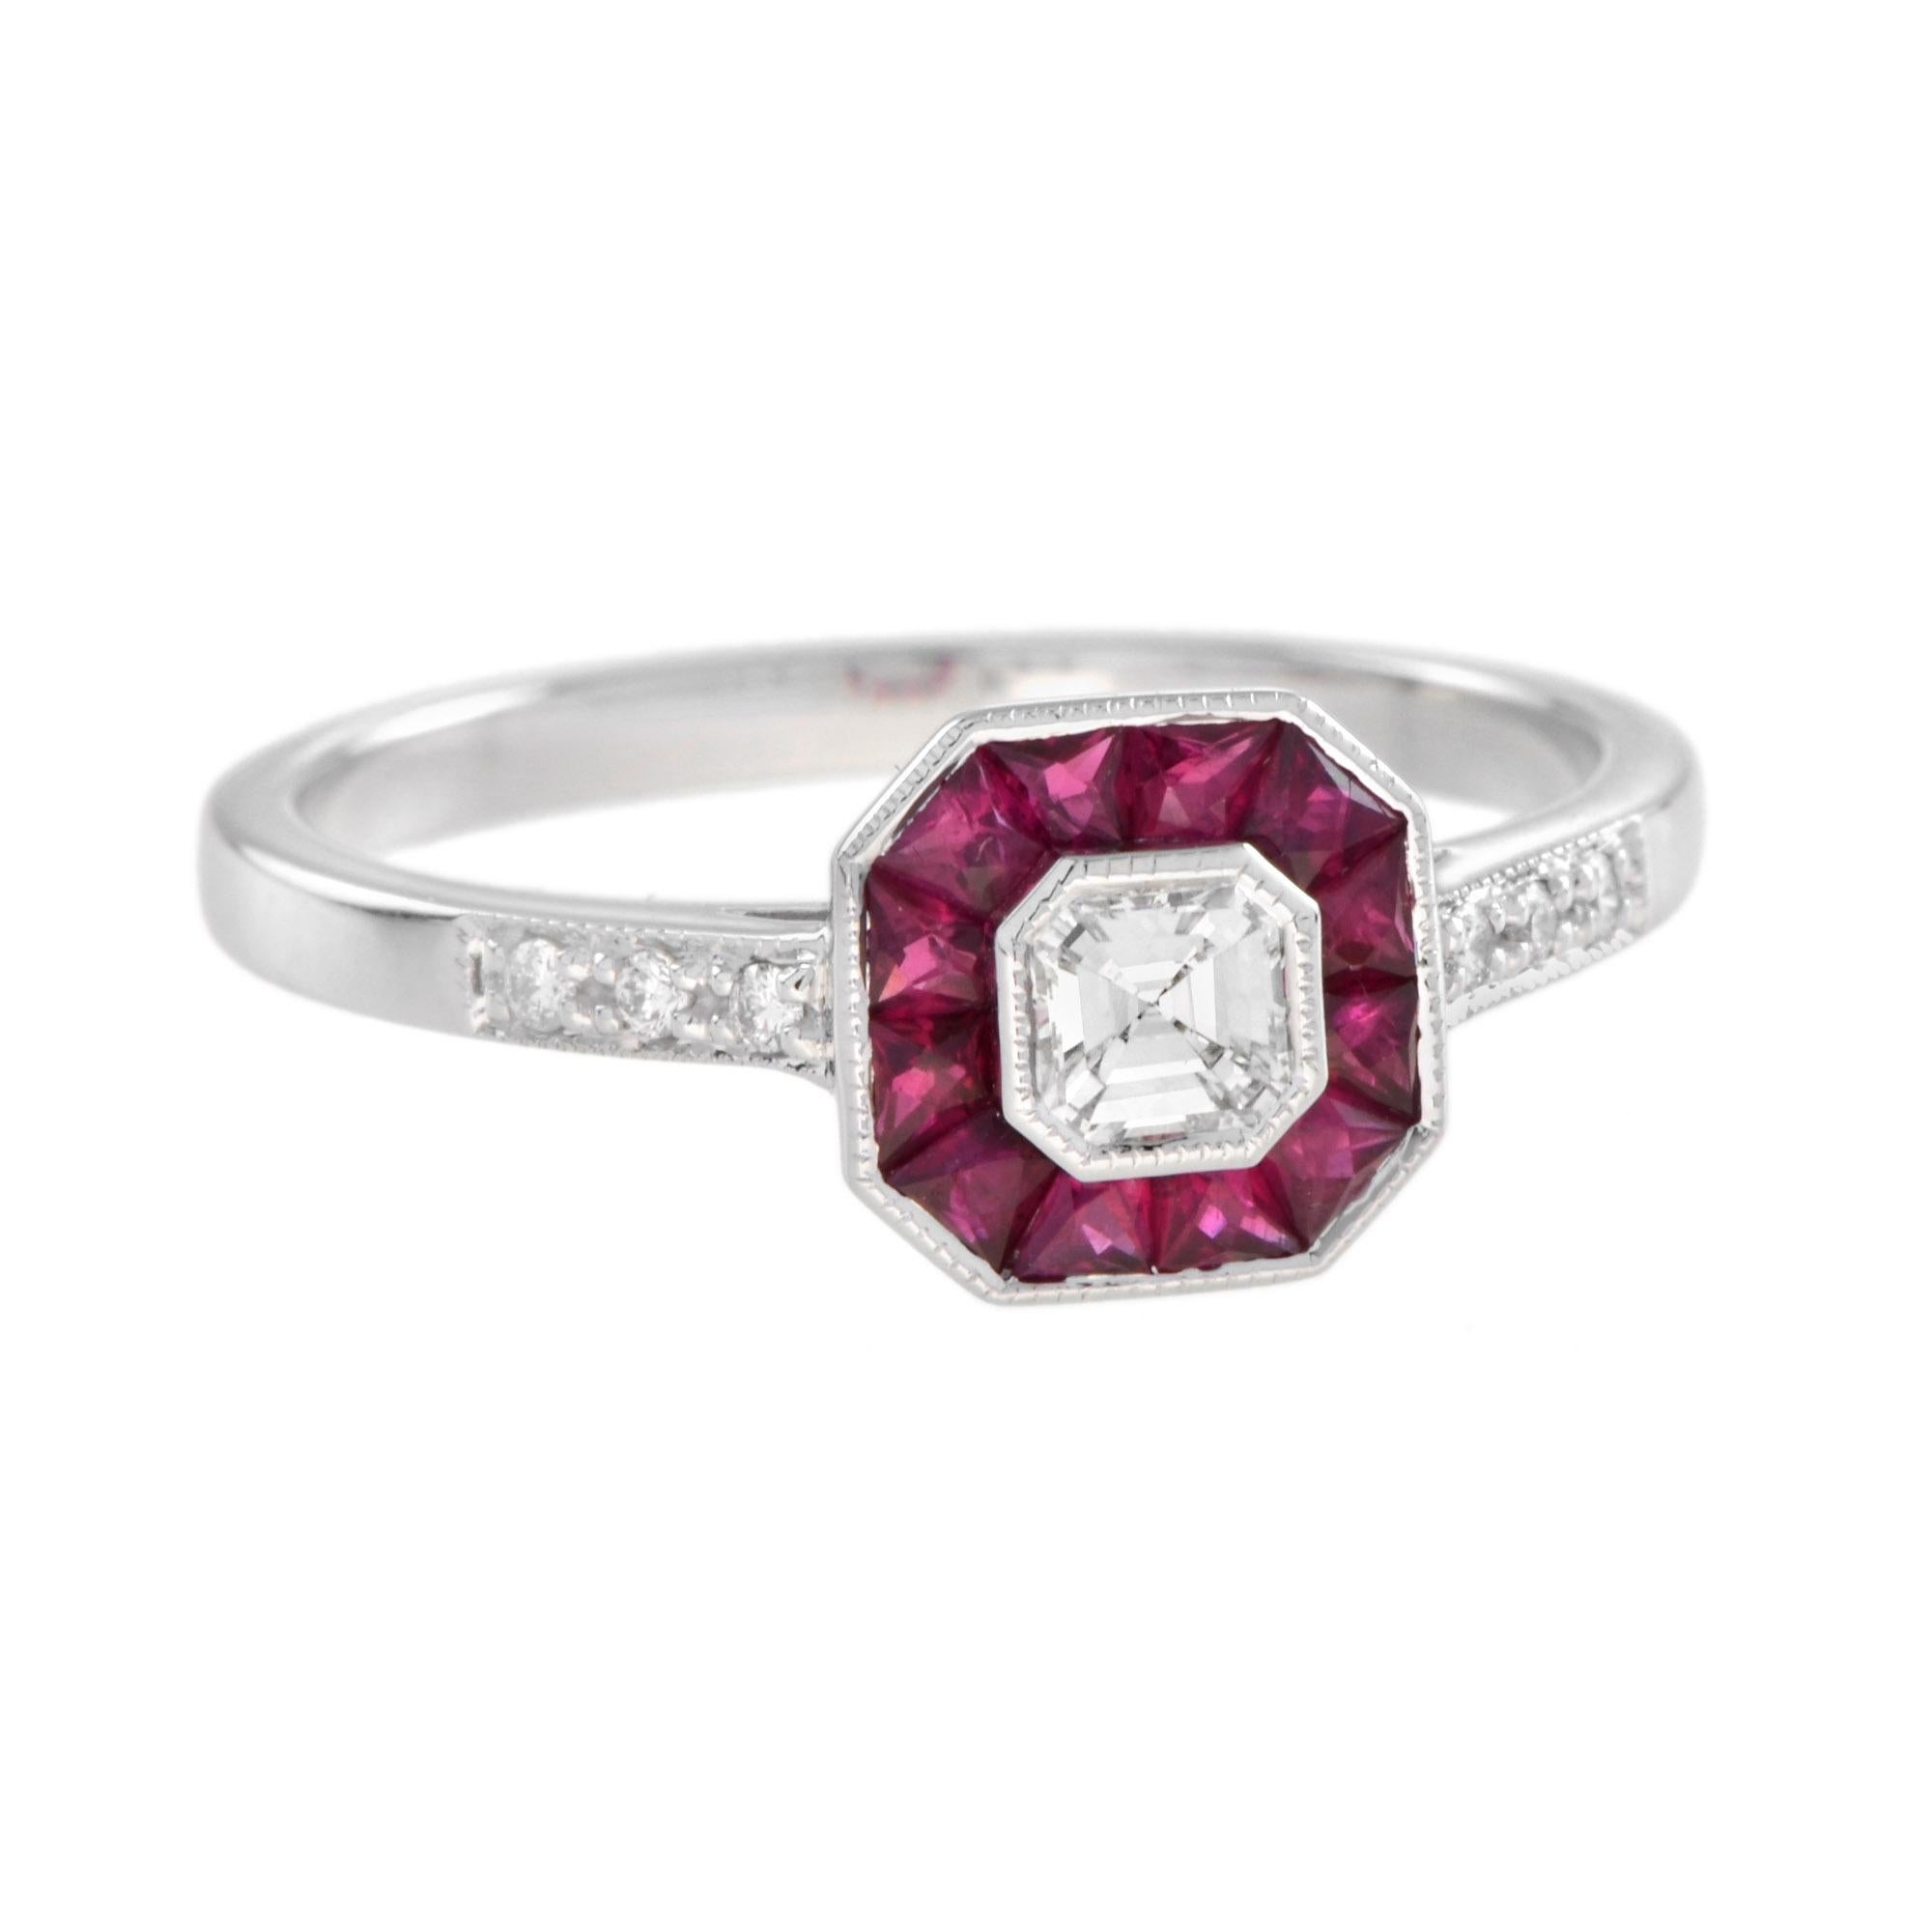 For Sale:  Nova Art Deco Style Emerald Cut Diamond and Ruby Target Ring in 14K White Gold 3